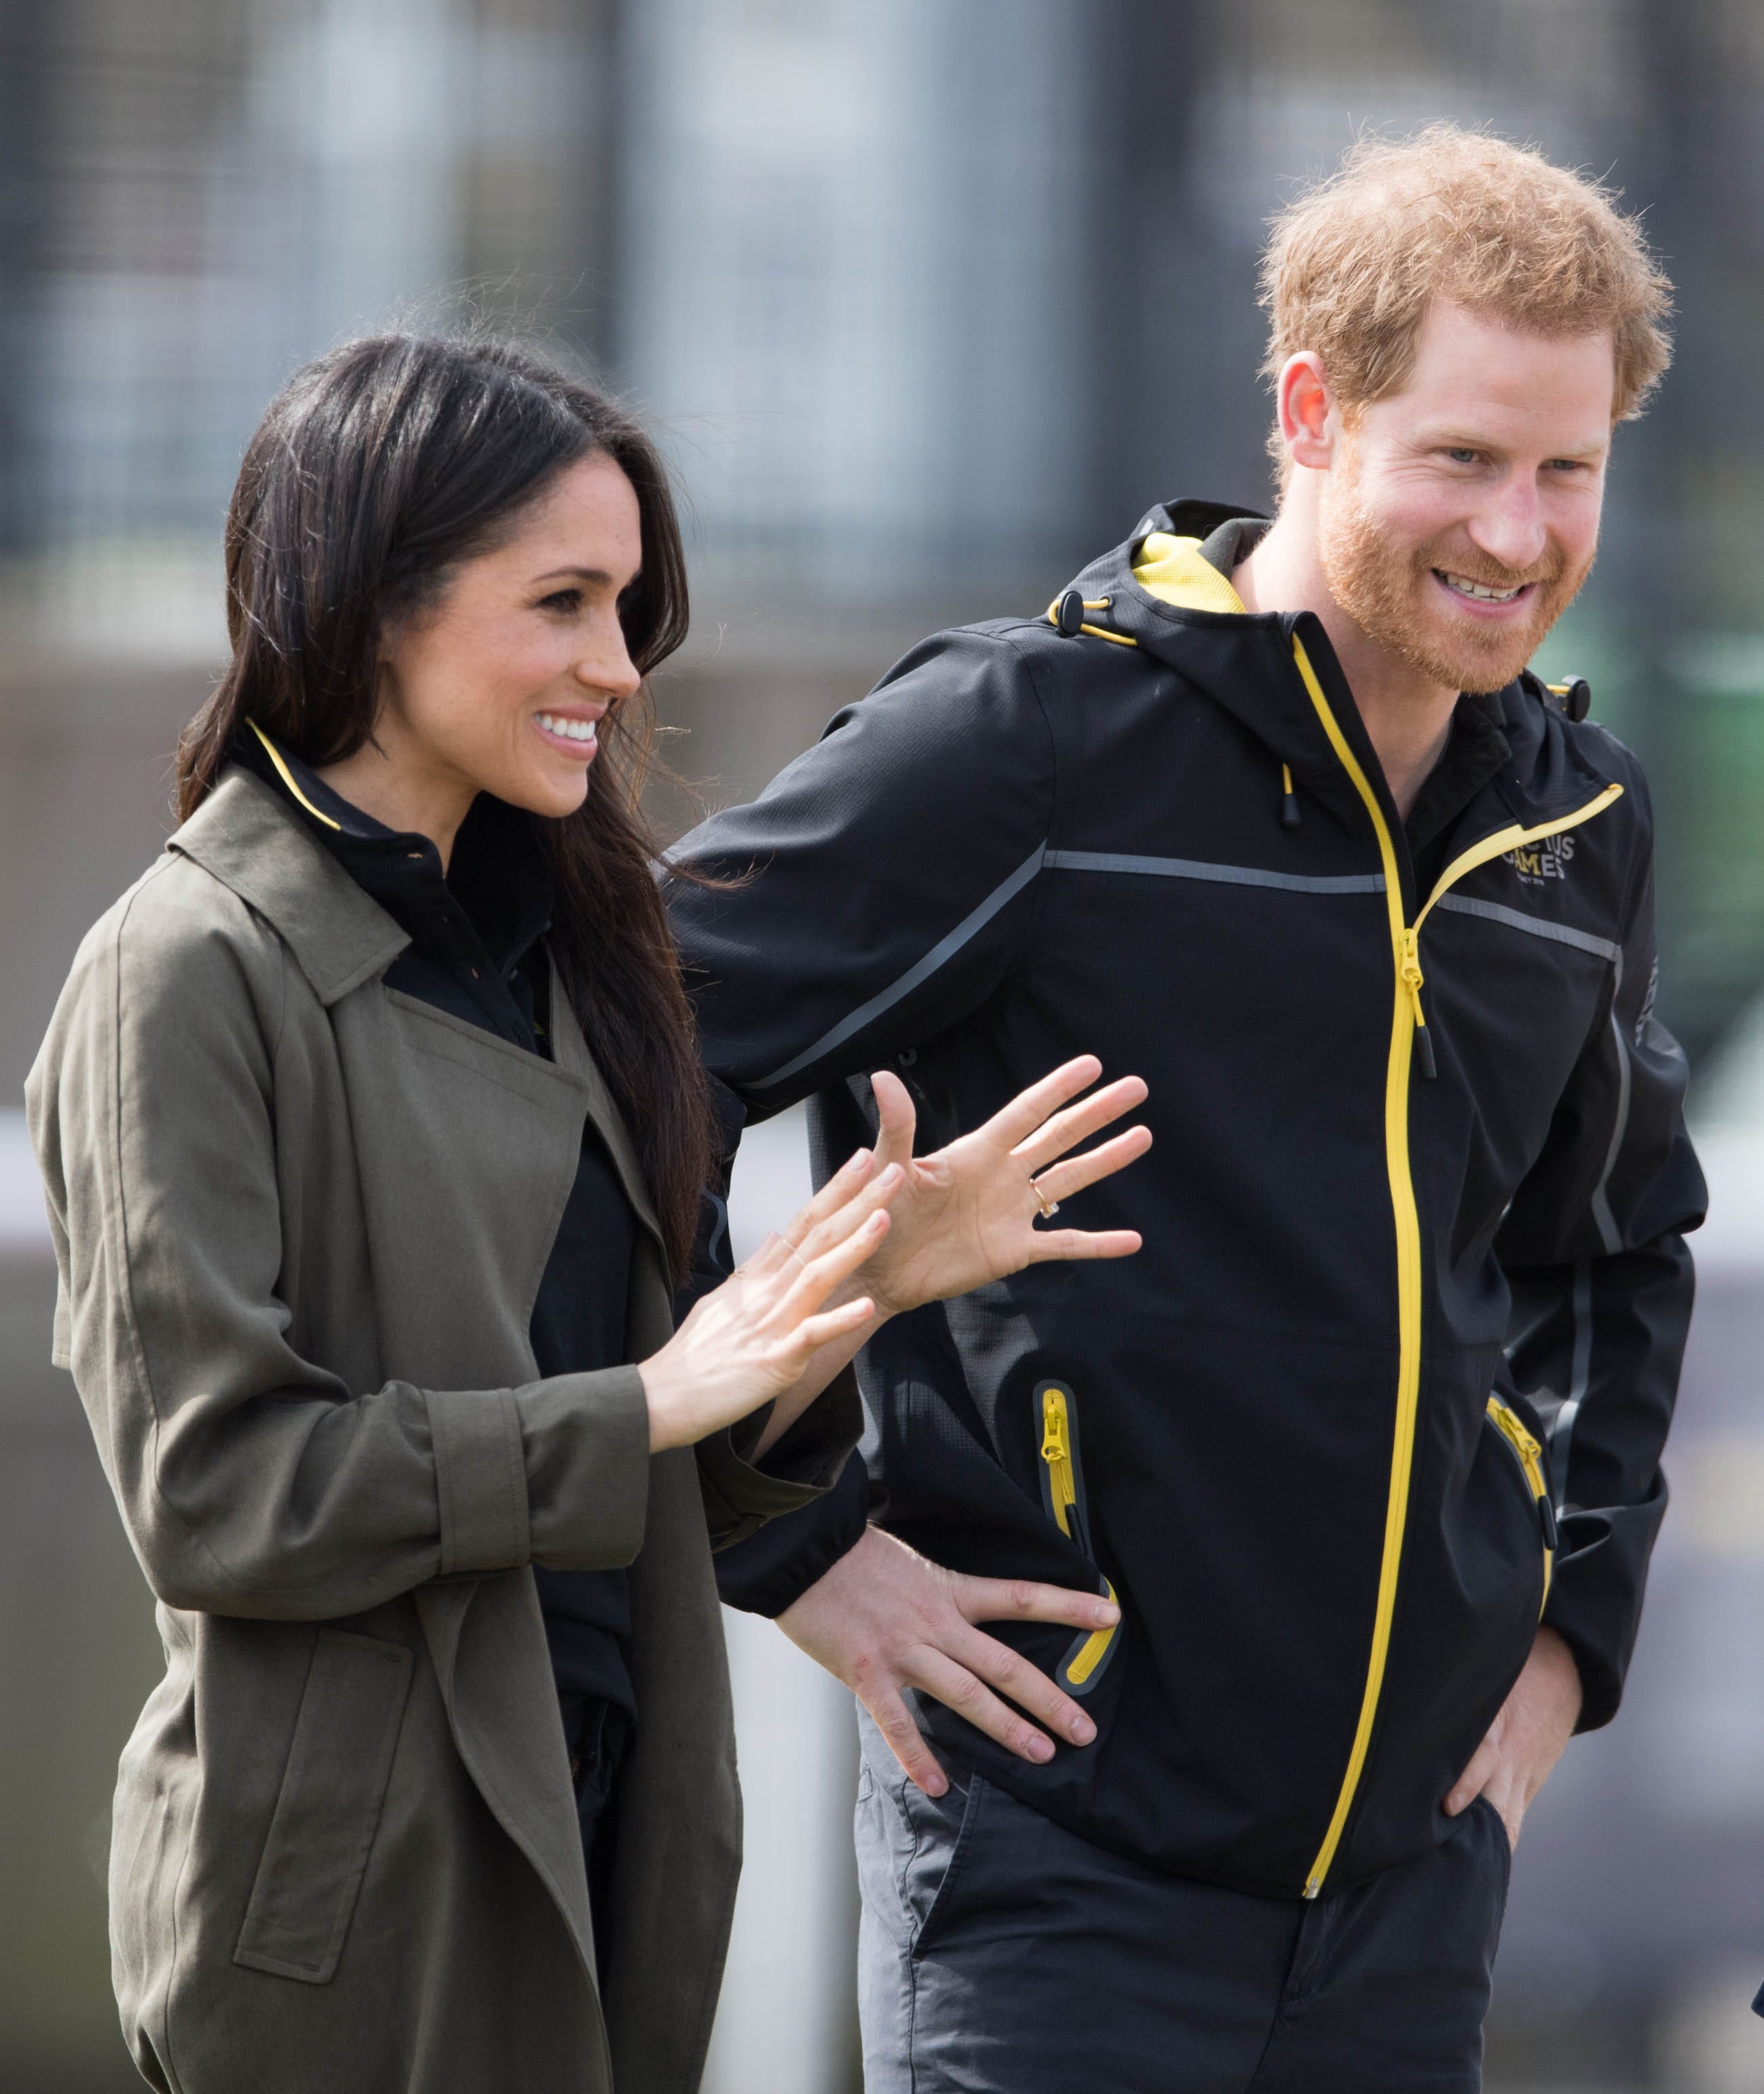 https://hips.hearstapps.com/hmg-prod.s3.amazonaws.com/images/hbz-prince-harry-meghan-markle-cute-moments-gettyimages-942780036-1523378910.jpg?crop=1xw:1xh;center,top